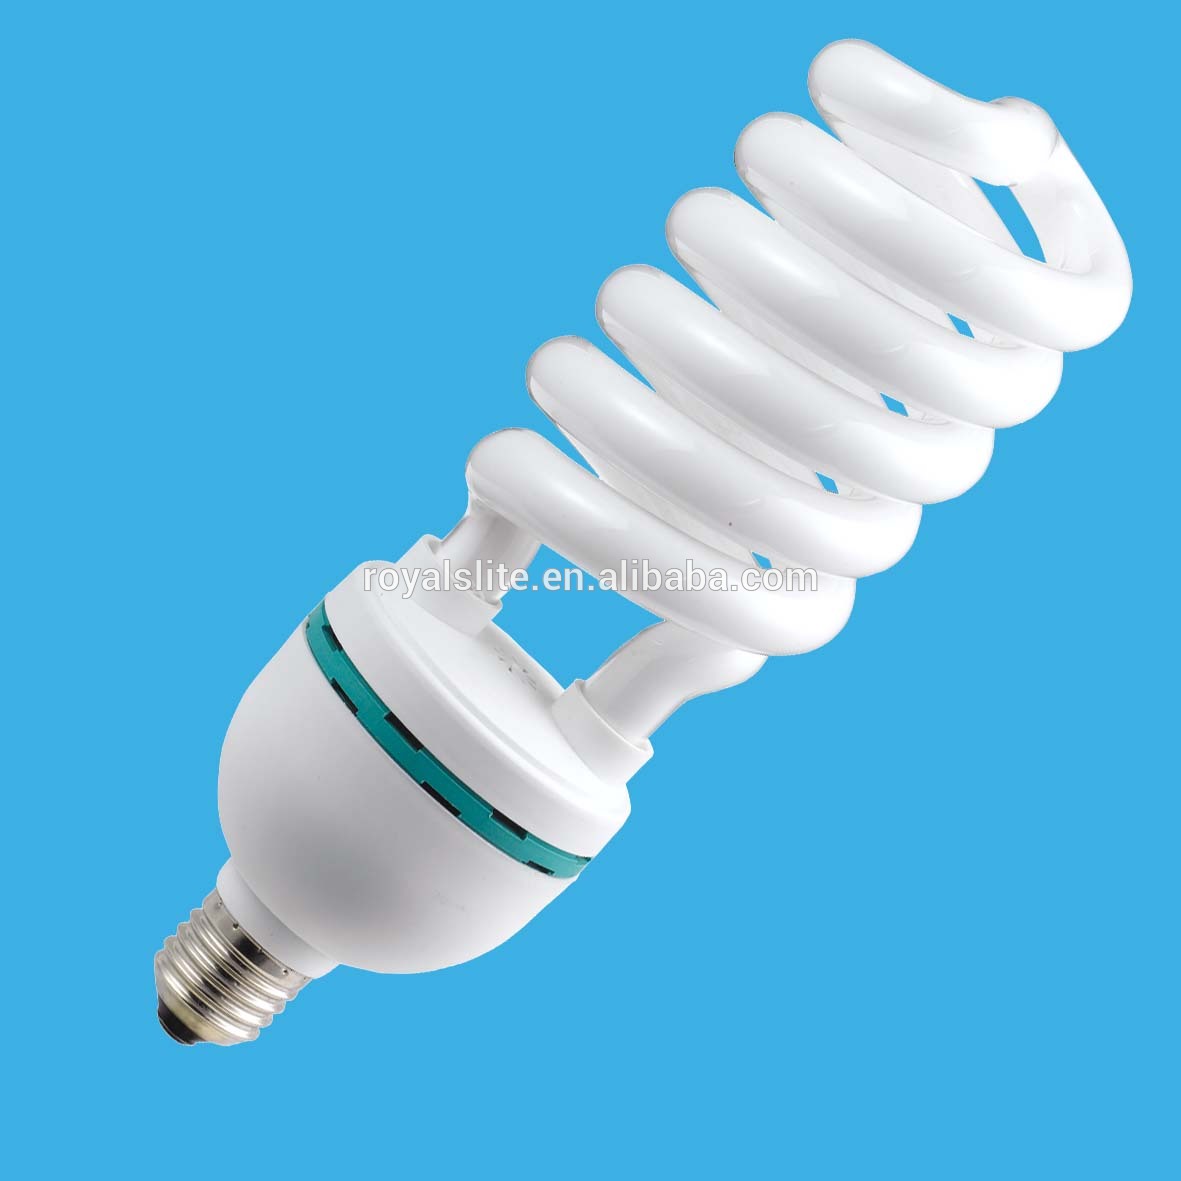 hot new products for 2018 bestsellers in china cfl bulb